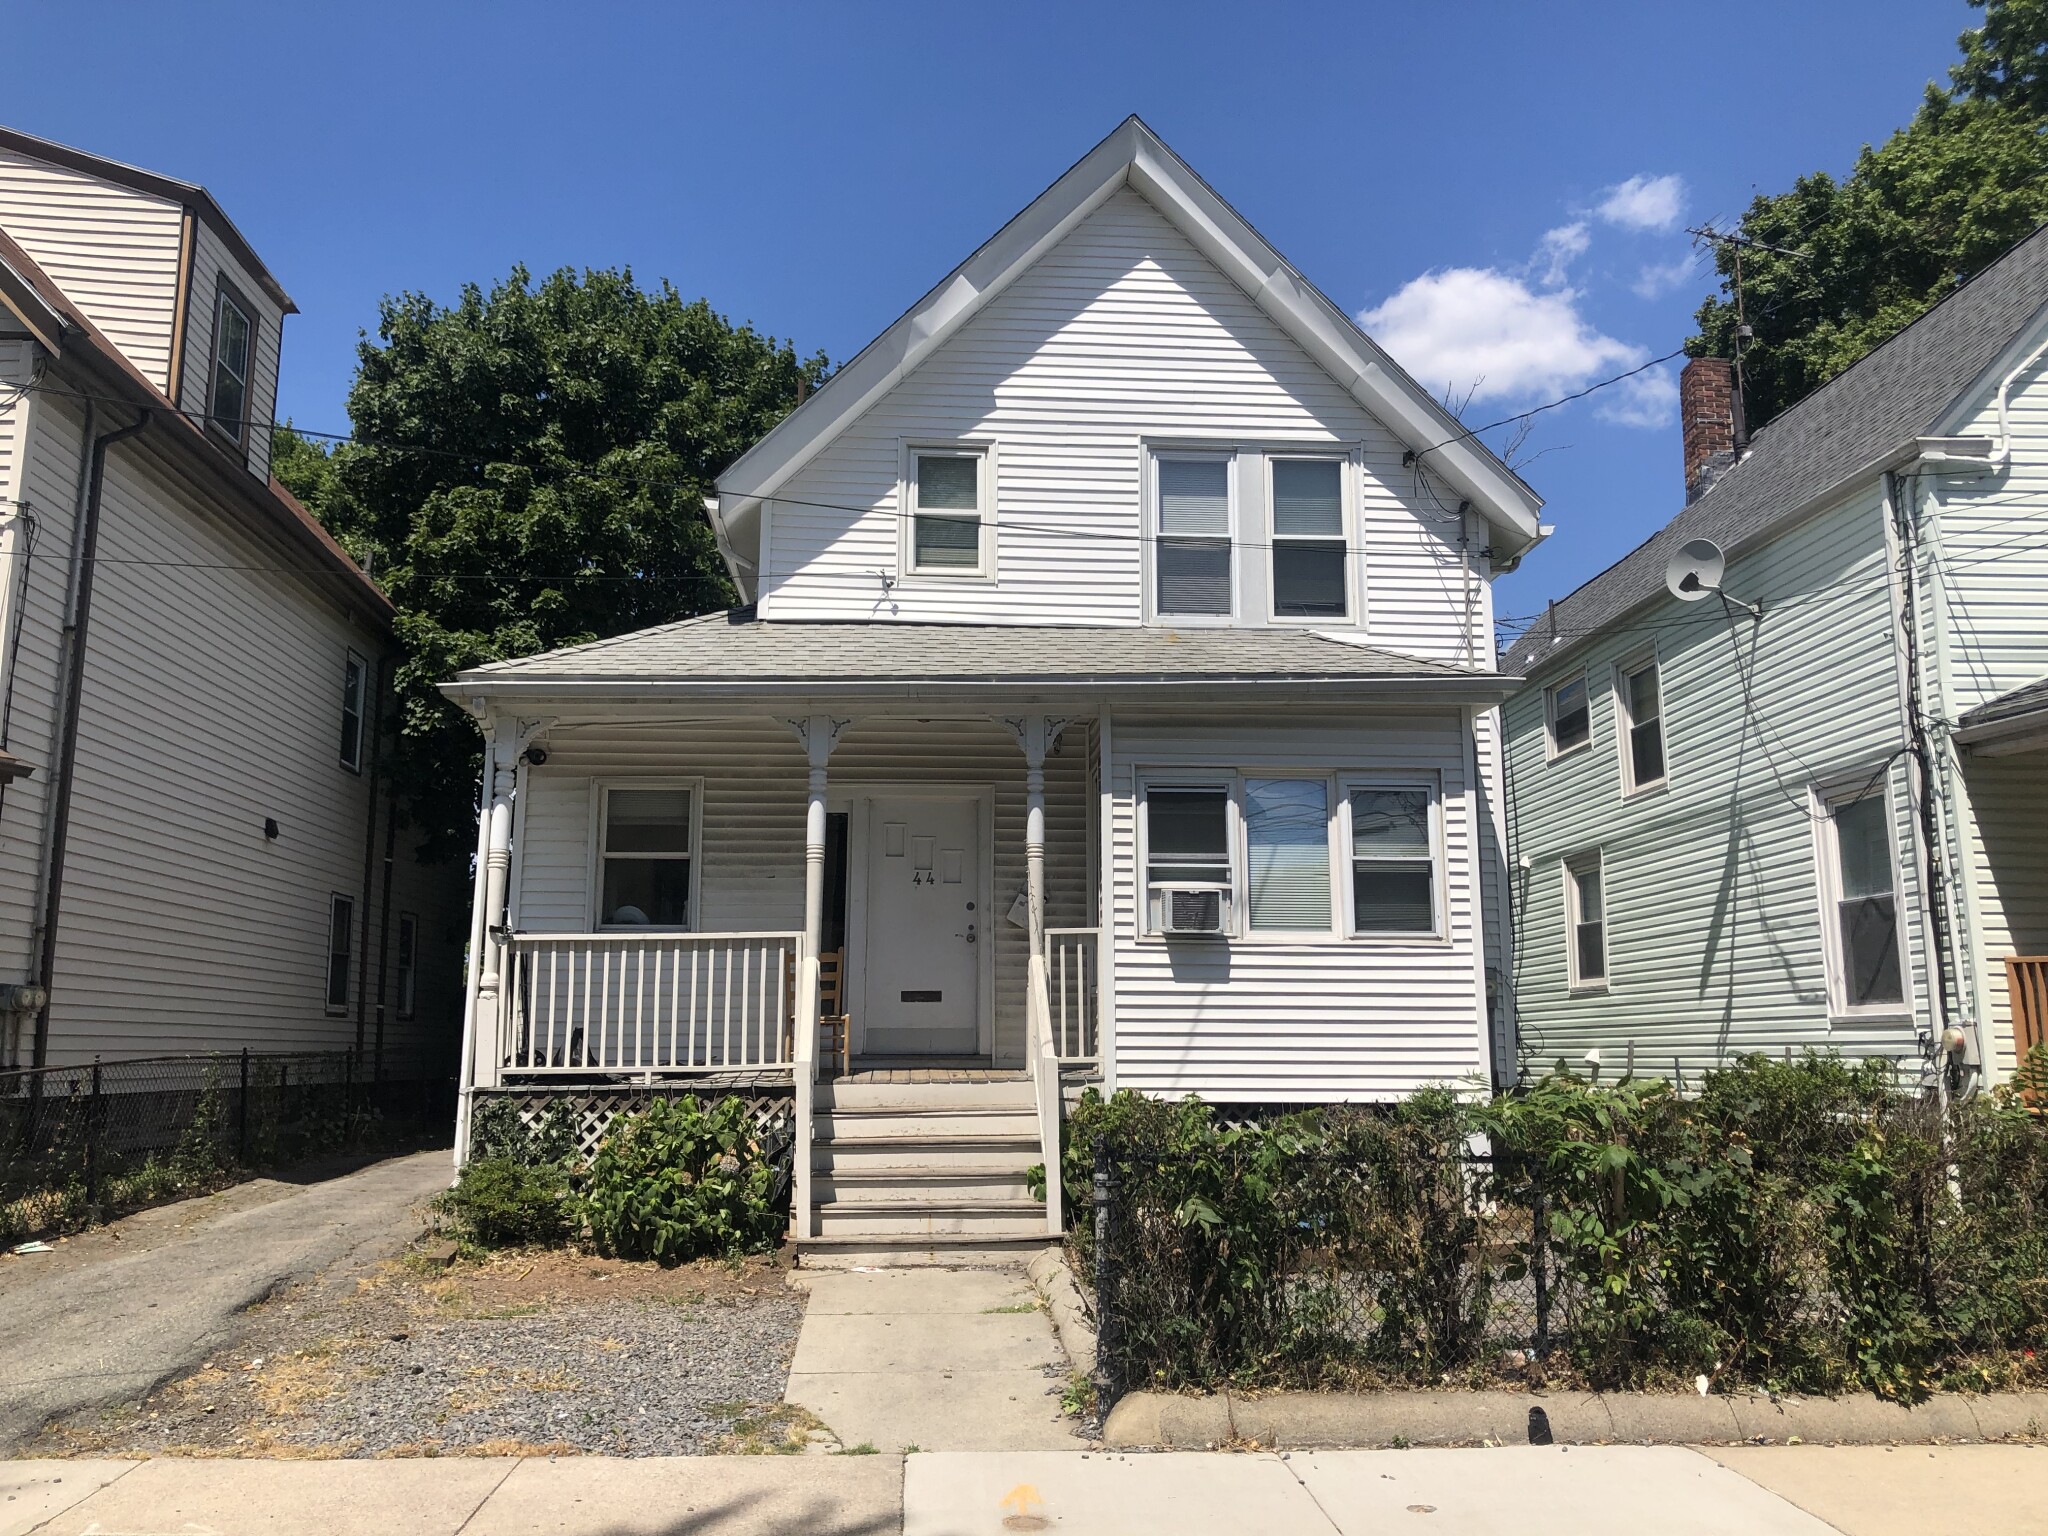 6 Beds, 3 Baths apartment in Boston, Allston for $6,000